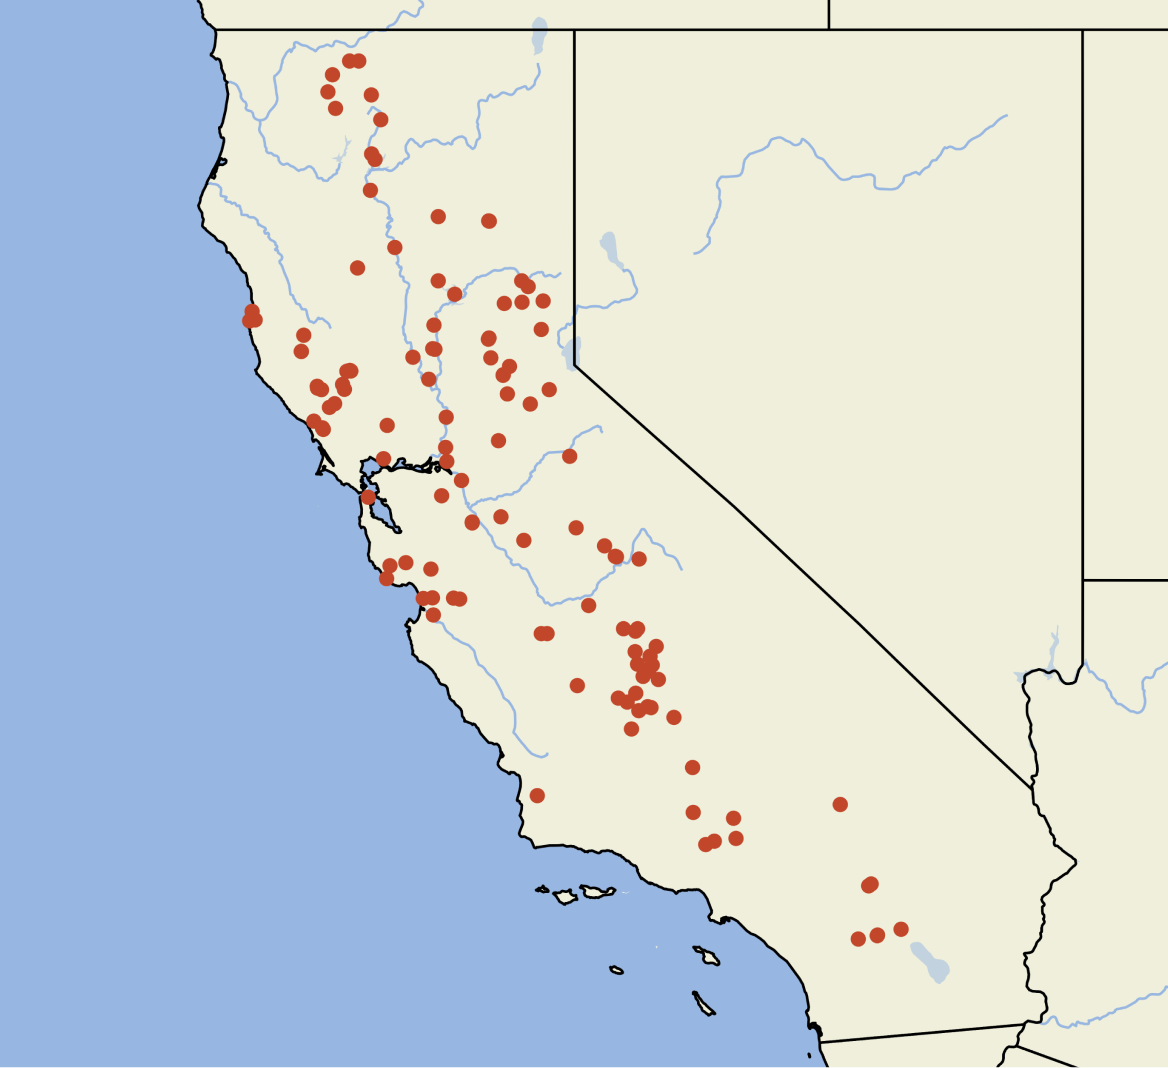 Map of California showing community water systems affected by drought